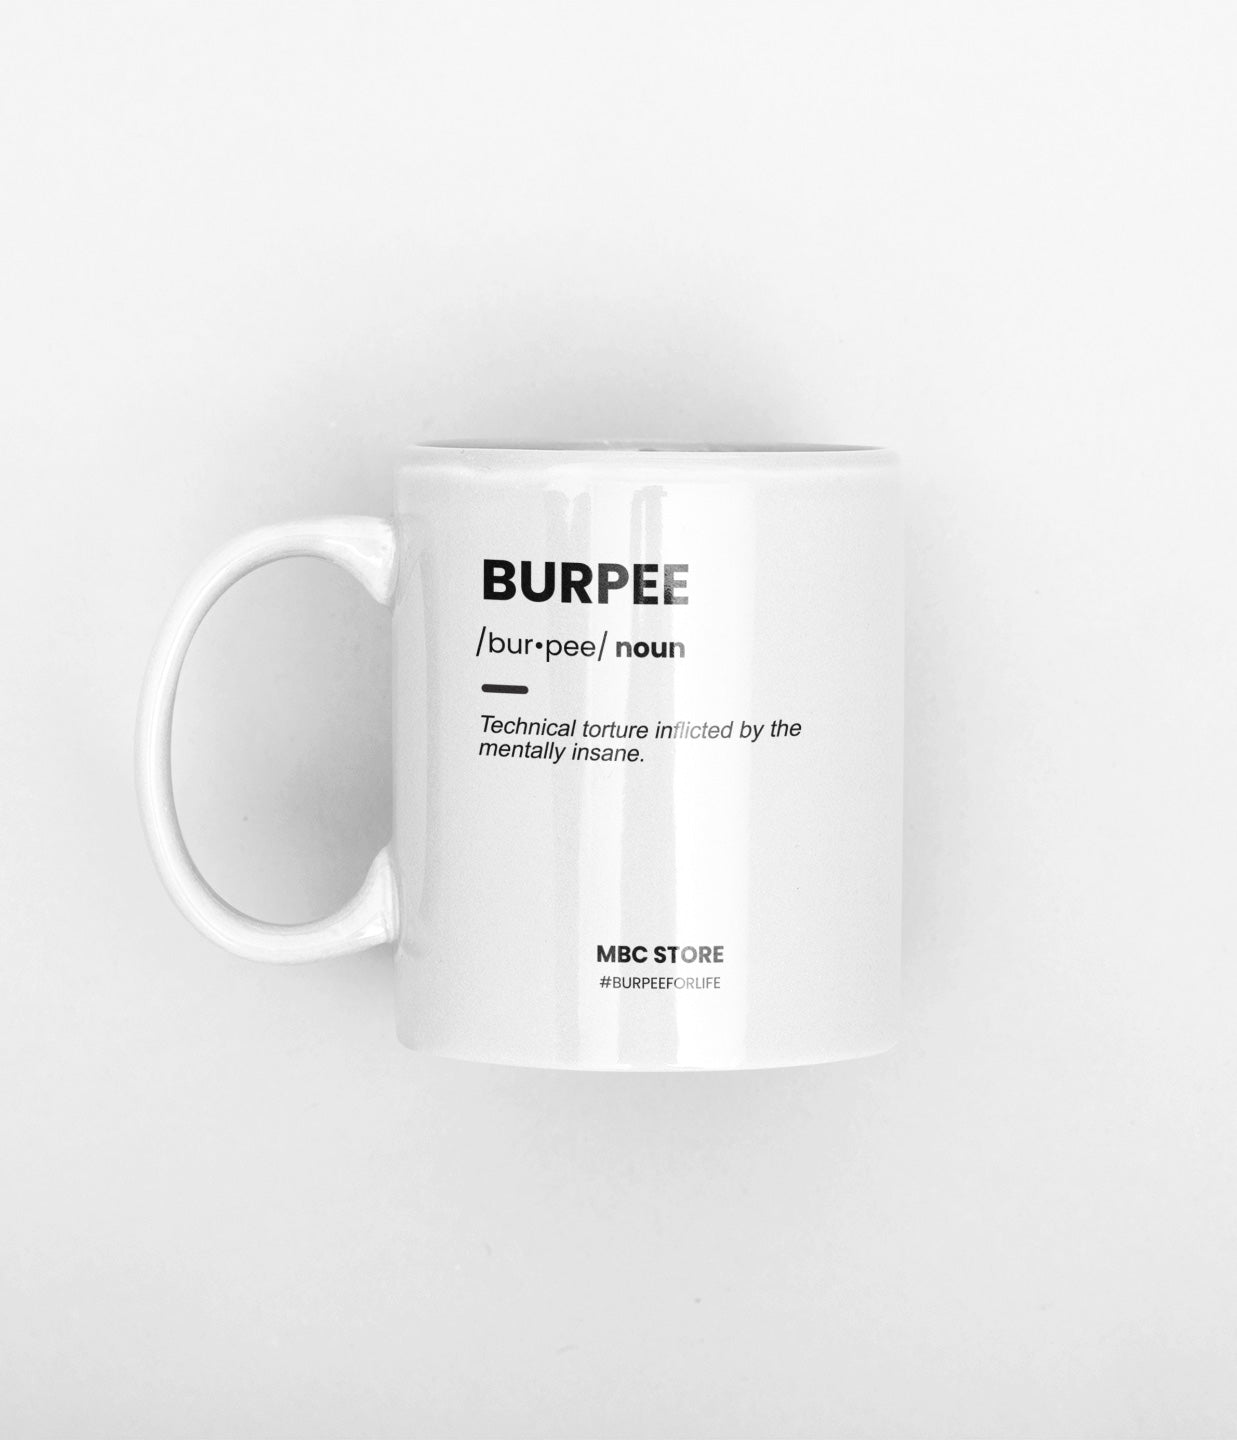 burpee is a technical torture inflicted by the mentally insane